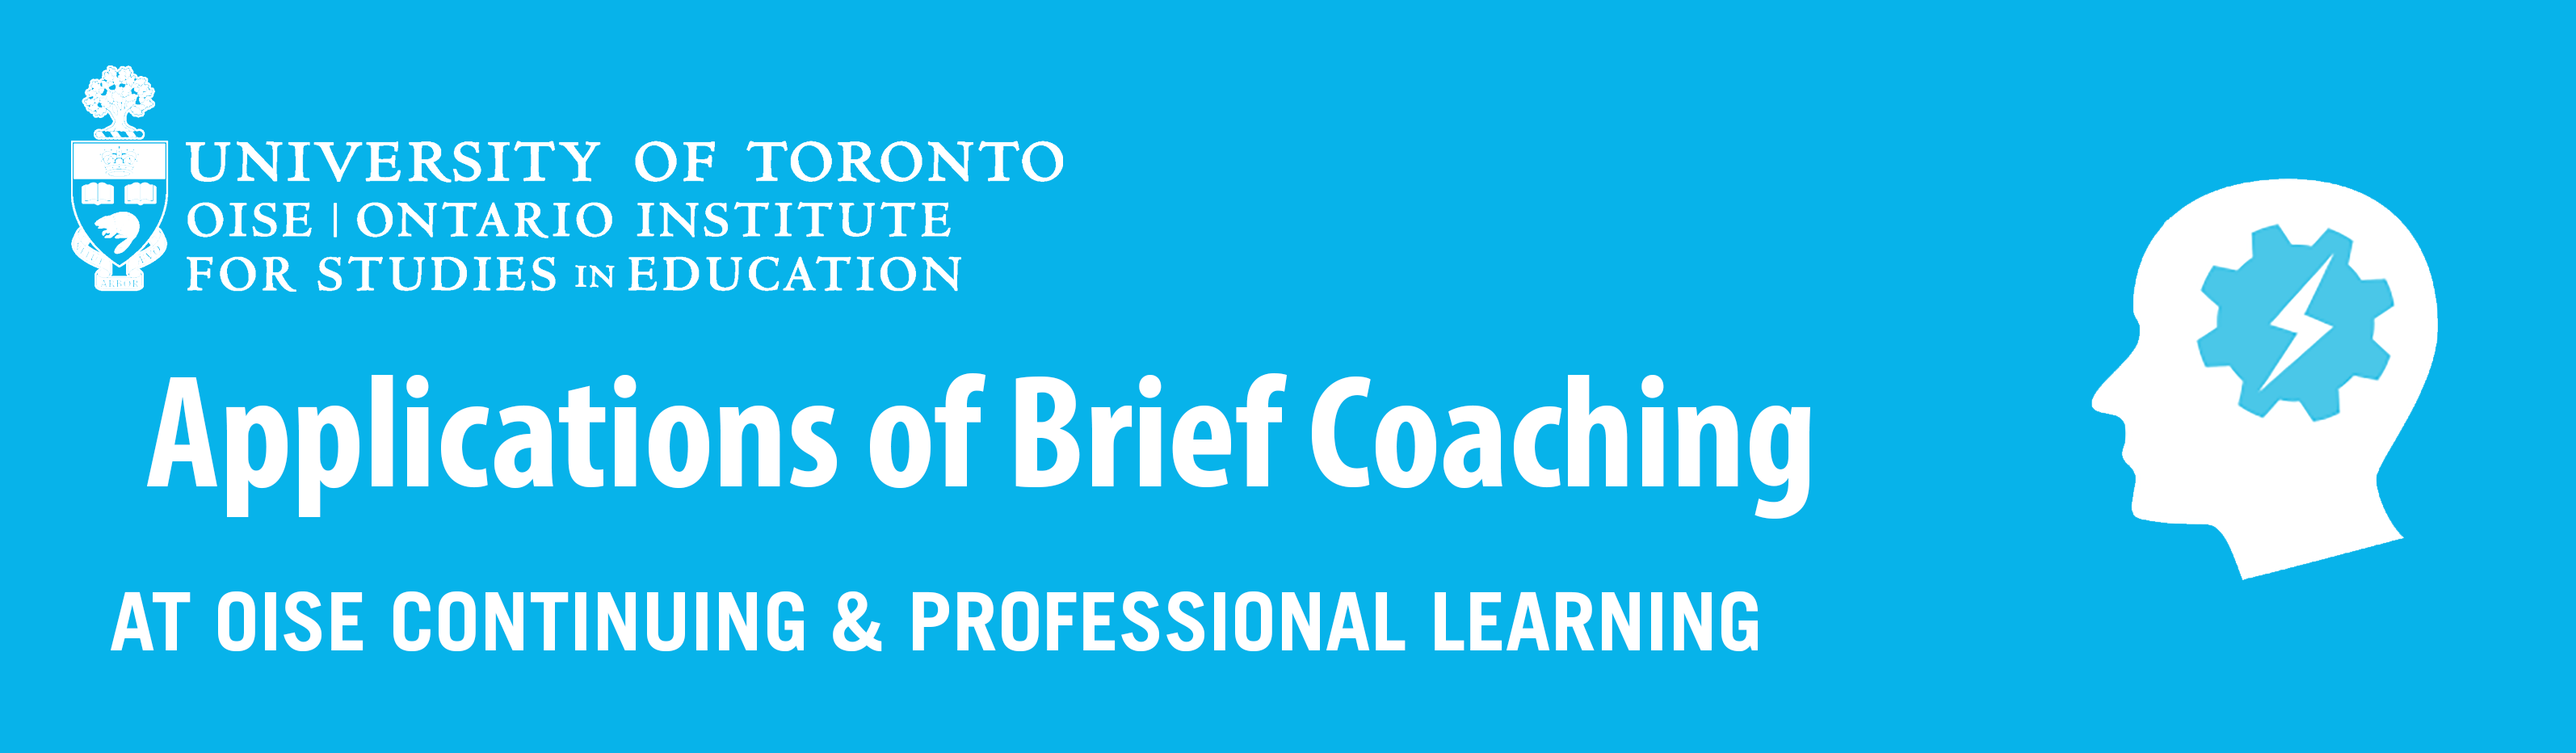 Application of Brief Coaching Course Banner